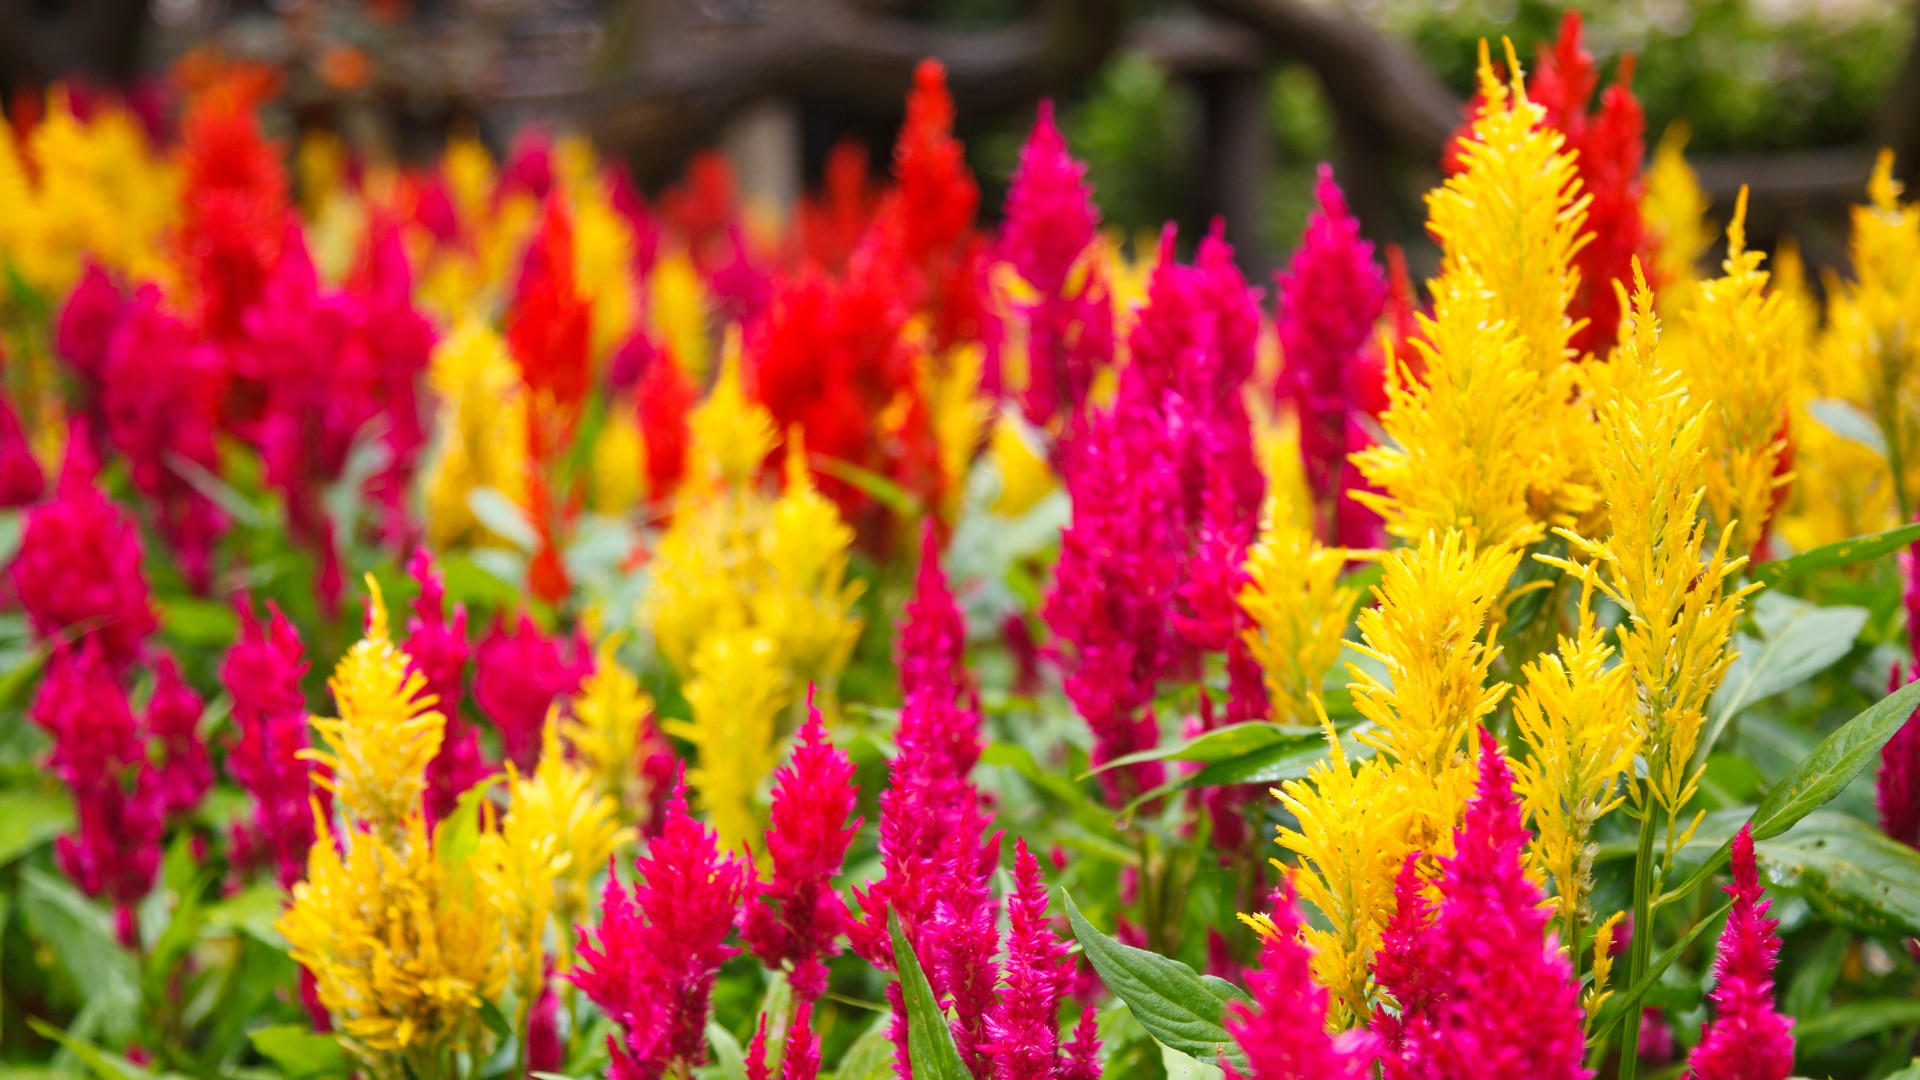 attention-the-season-of-celosia-is-over